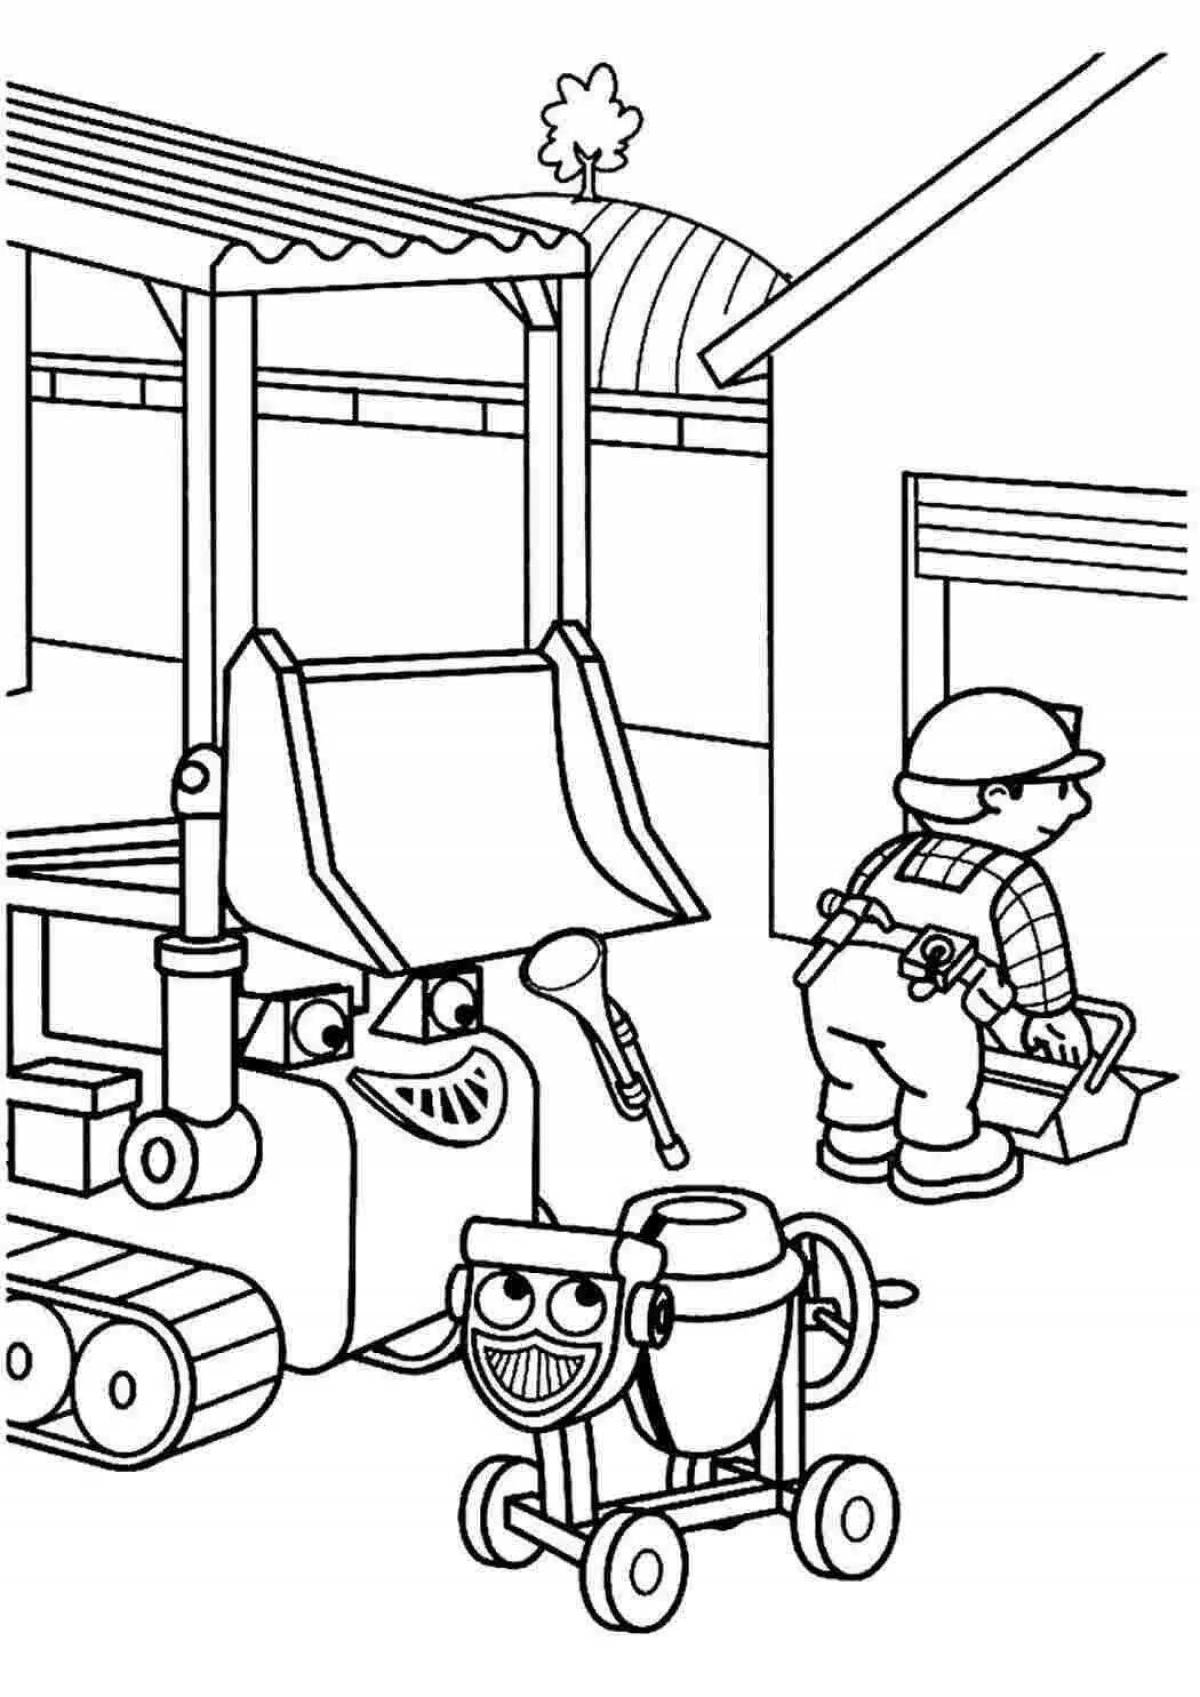 Coloring page unusual design for boys